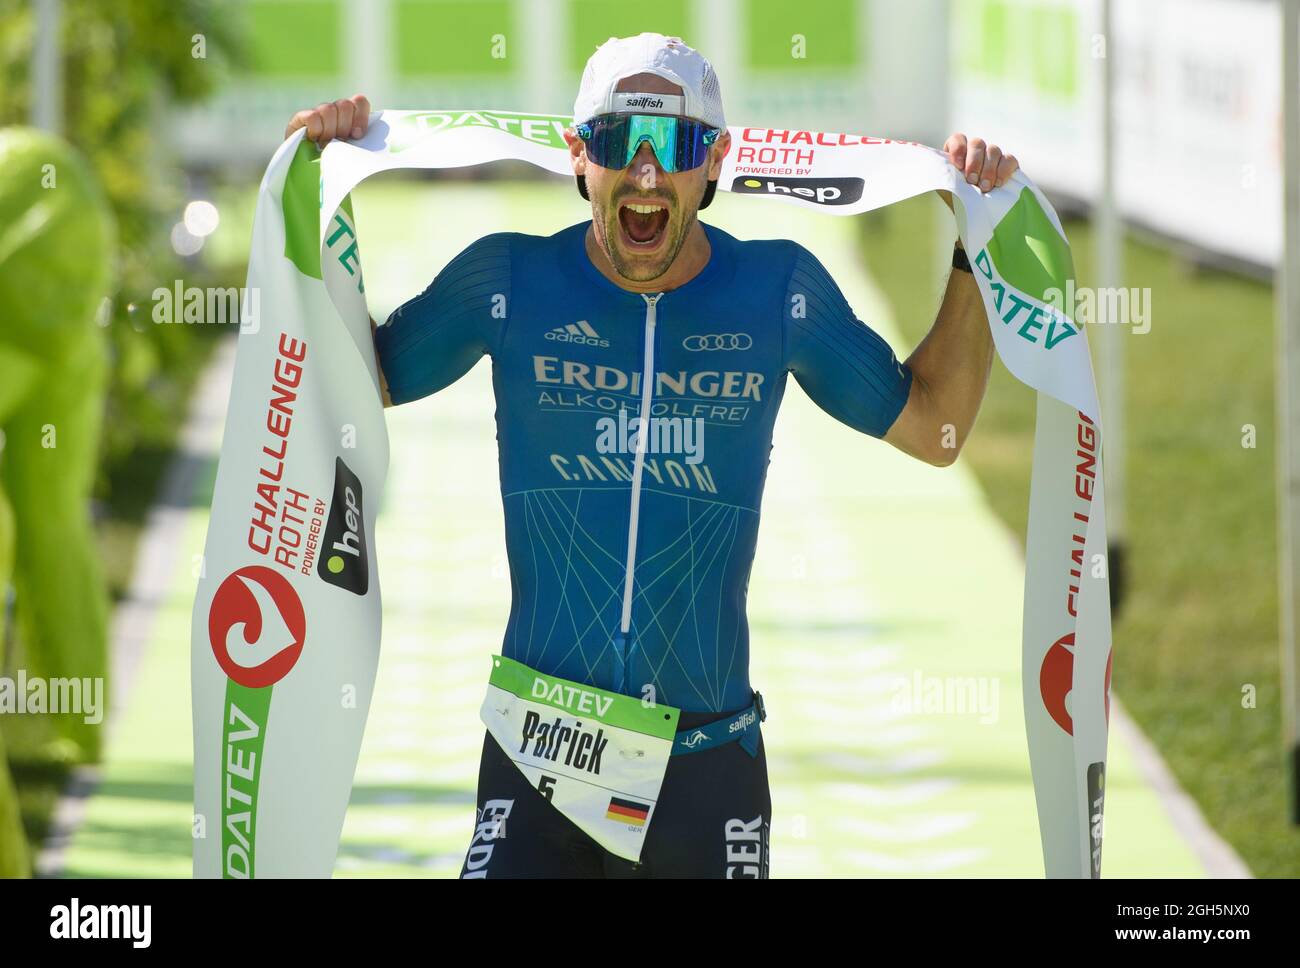 Roth, Germany. 05th Sep, 2021. Patrick Lange, triathlete from Germany,  during the running stage at the Datev Challenge Roth. At the 19th edition  of the triathlon, participants have to swim 3.8 km,